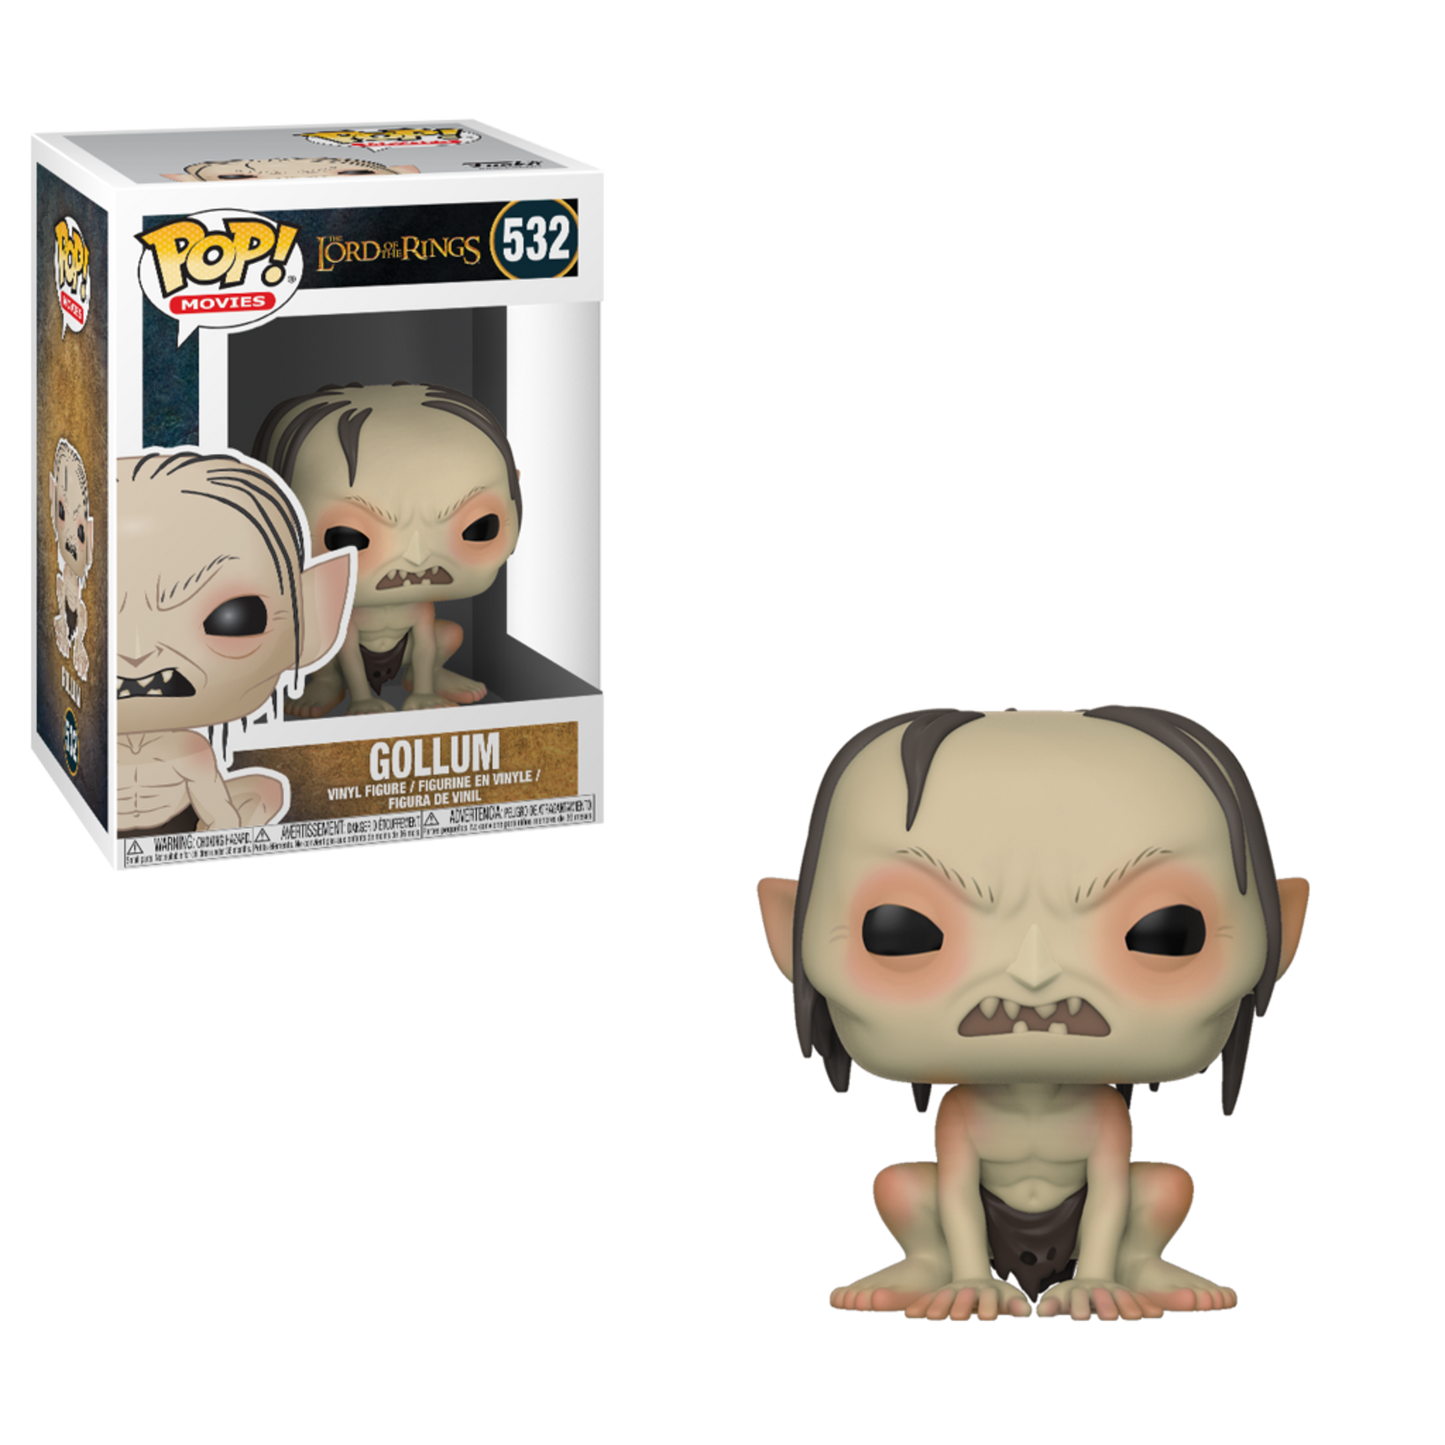 Funko pop! Films The Lord of the Rings Gollum PRECO